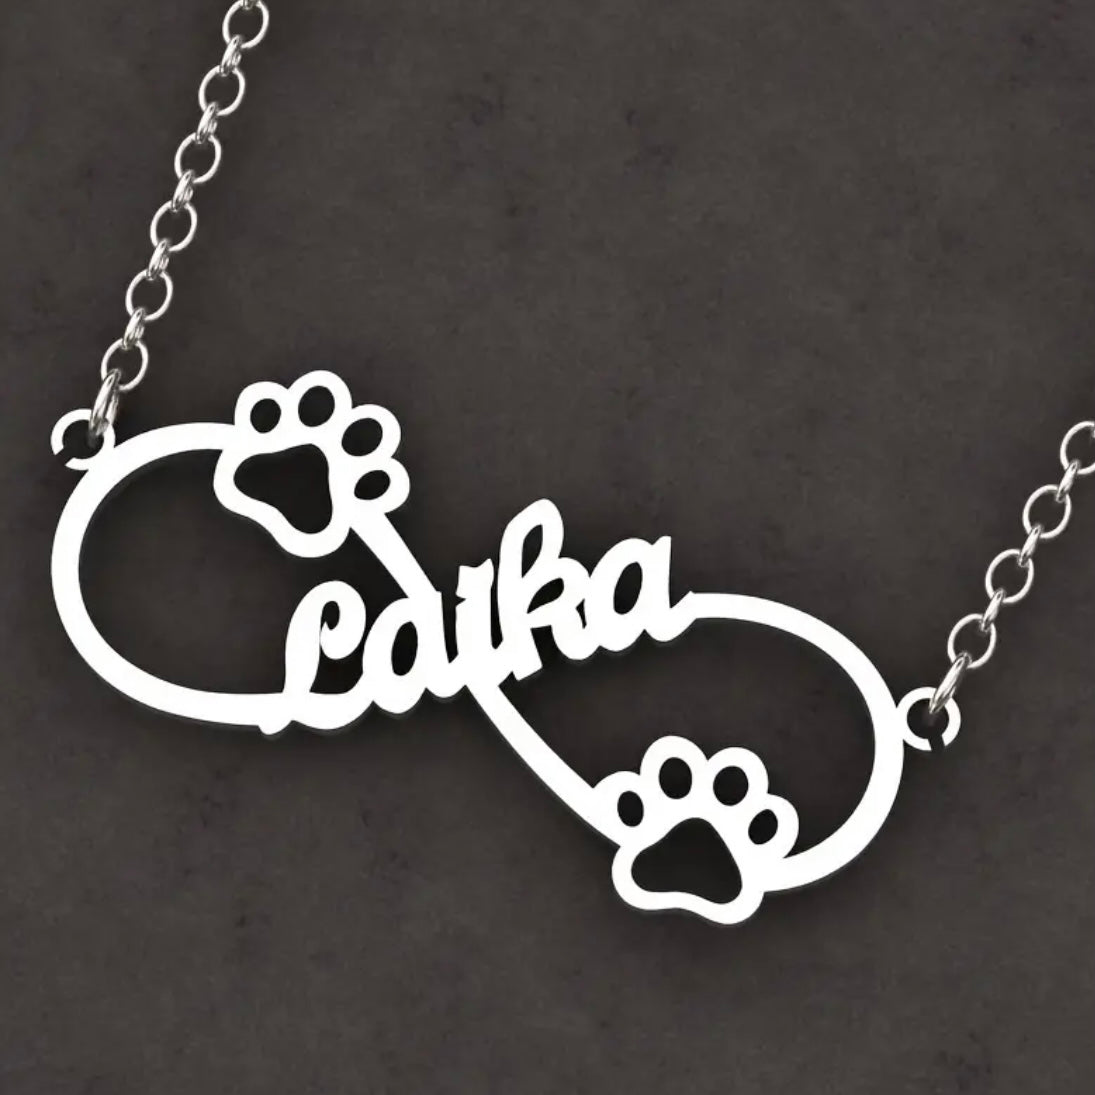 Infinity necklace with paws